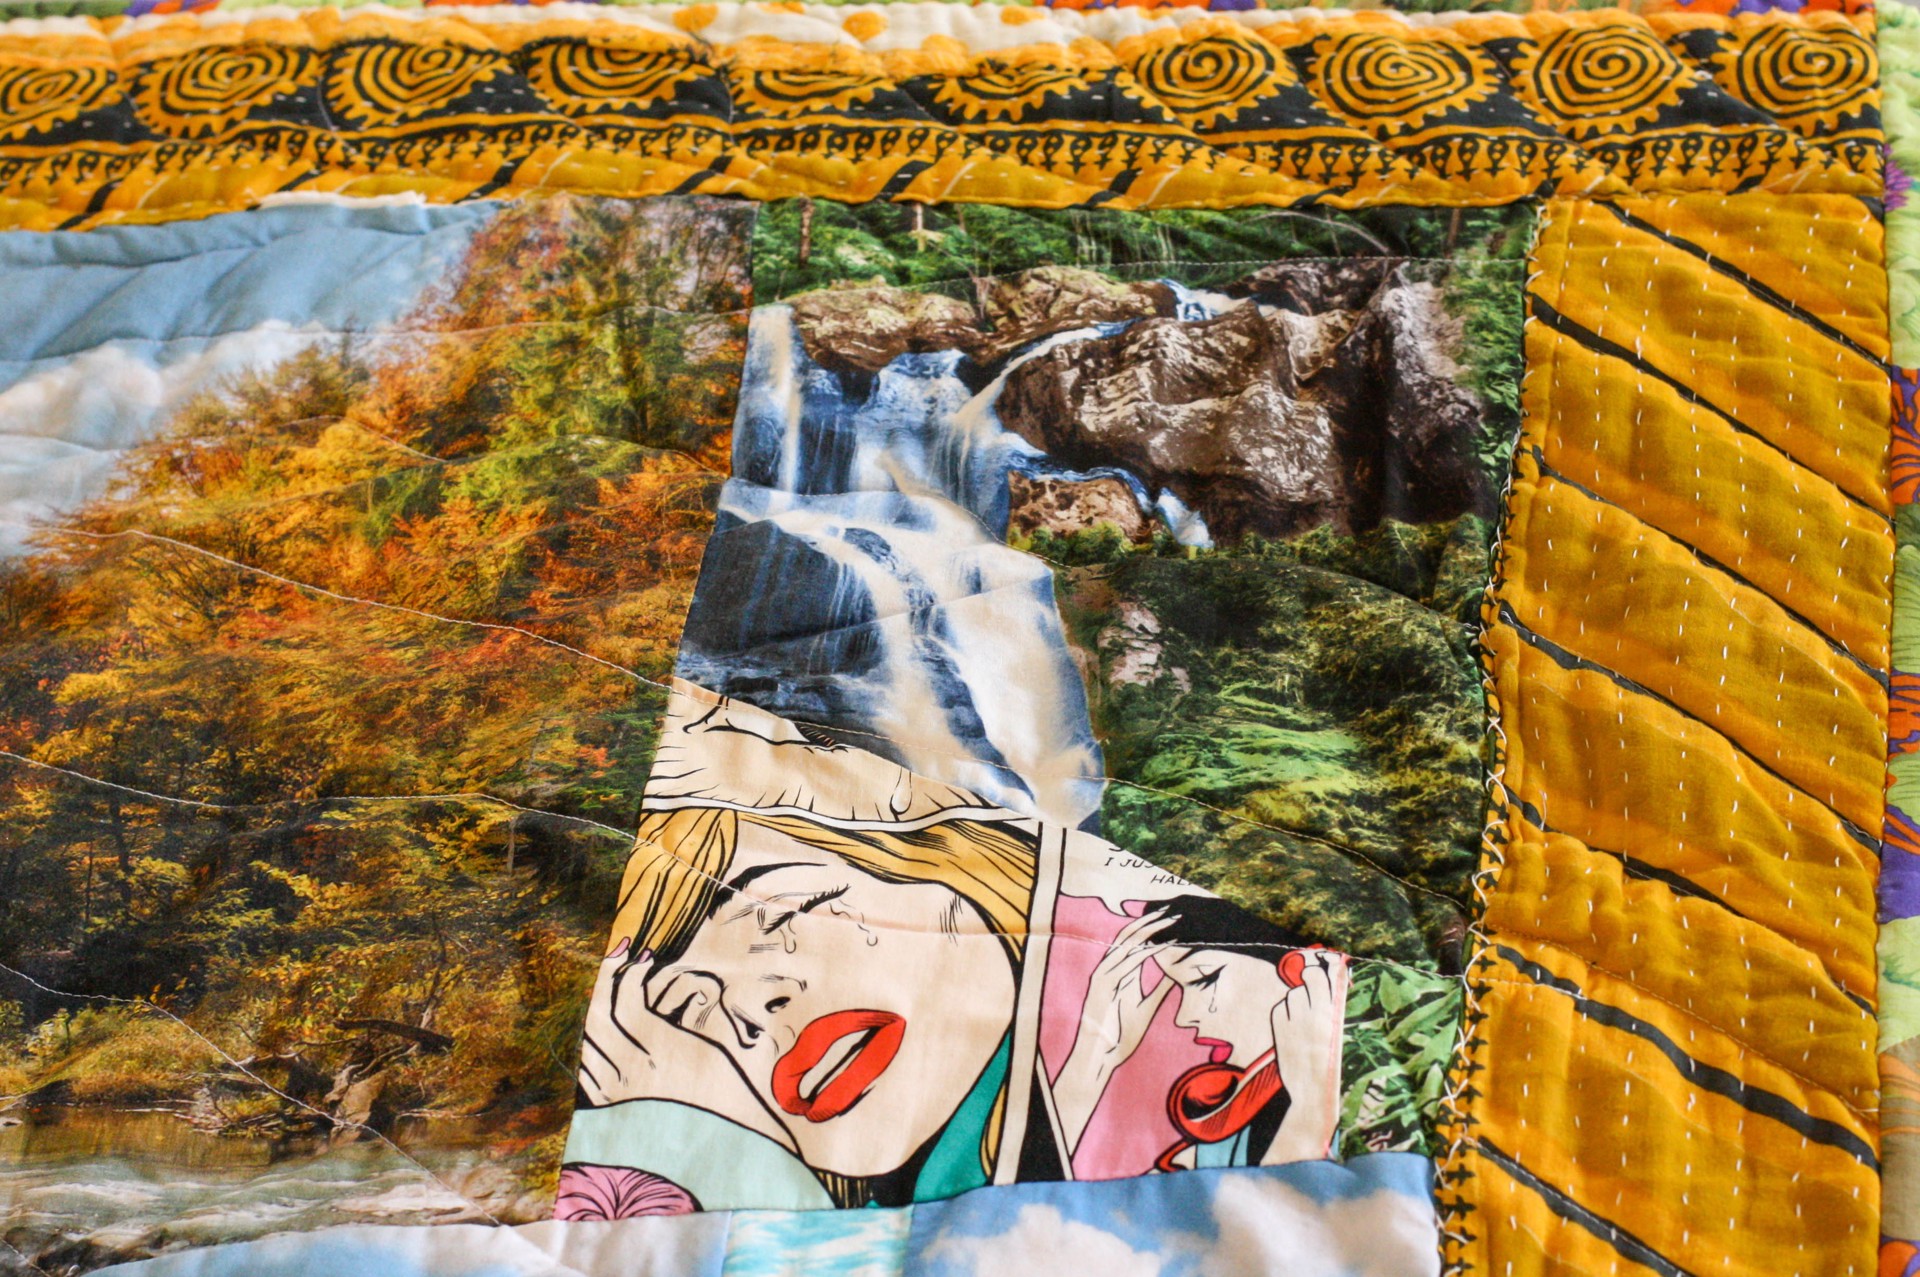 Mary Comforts the Grieving and Dying with a Mini Quilt by Lauren Gregory